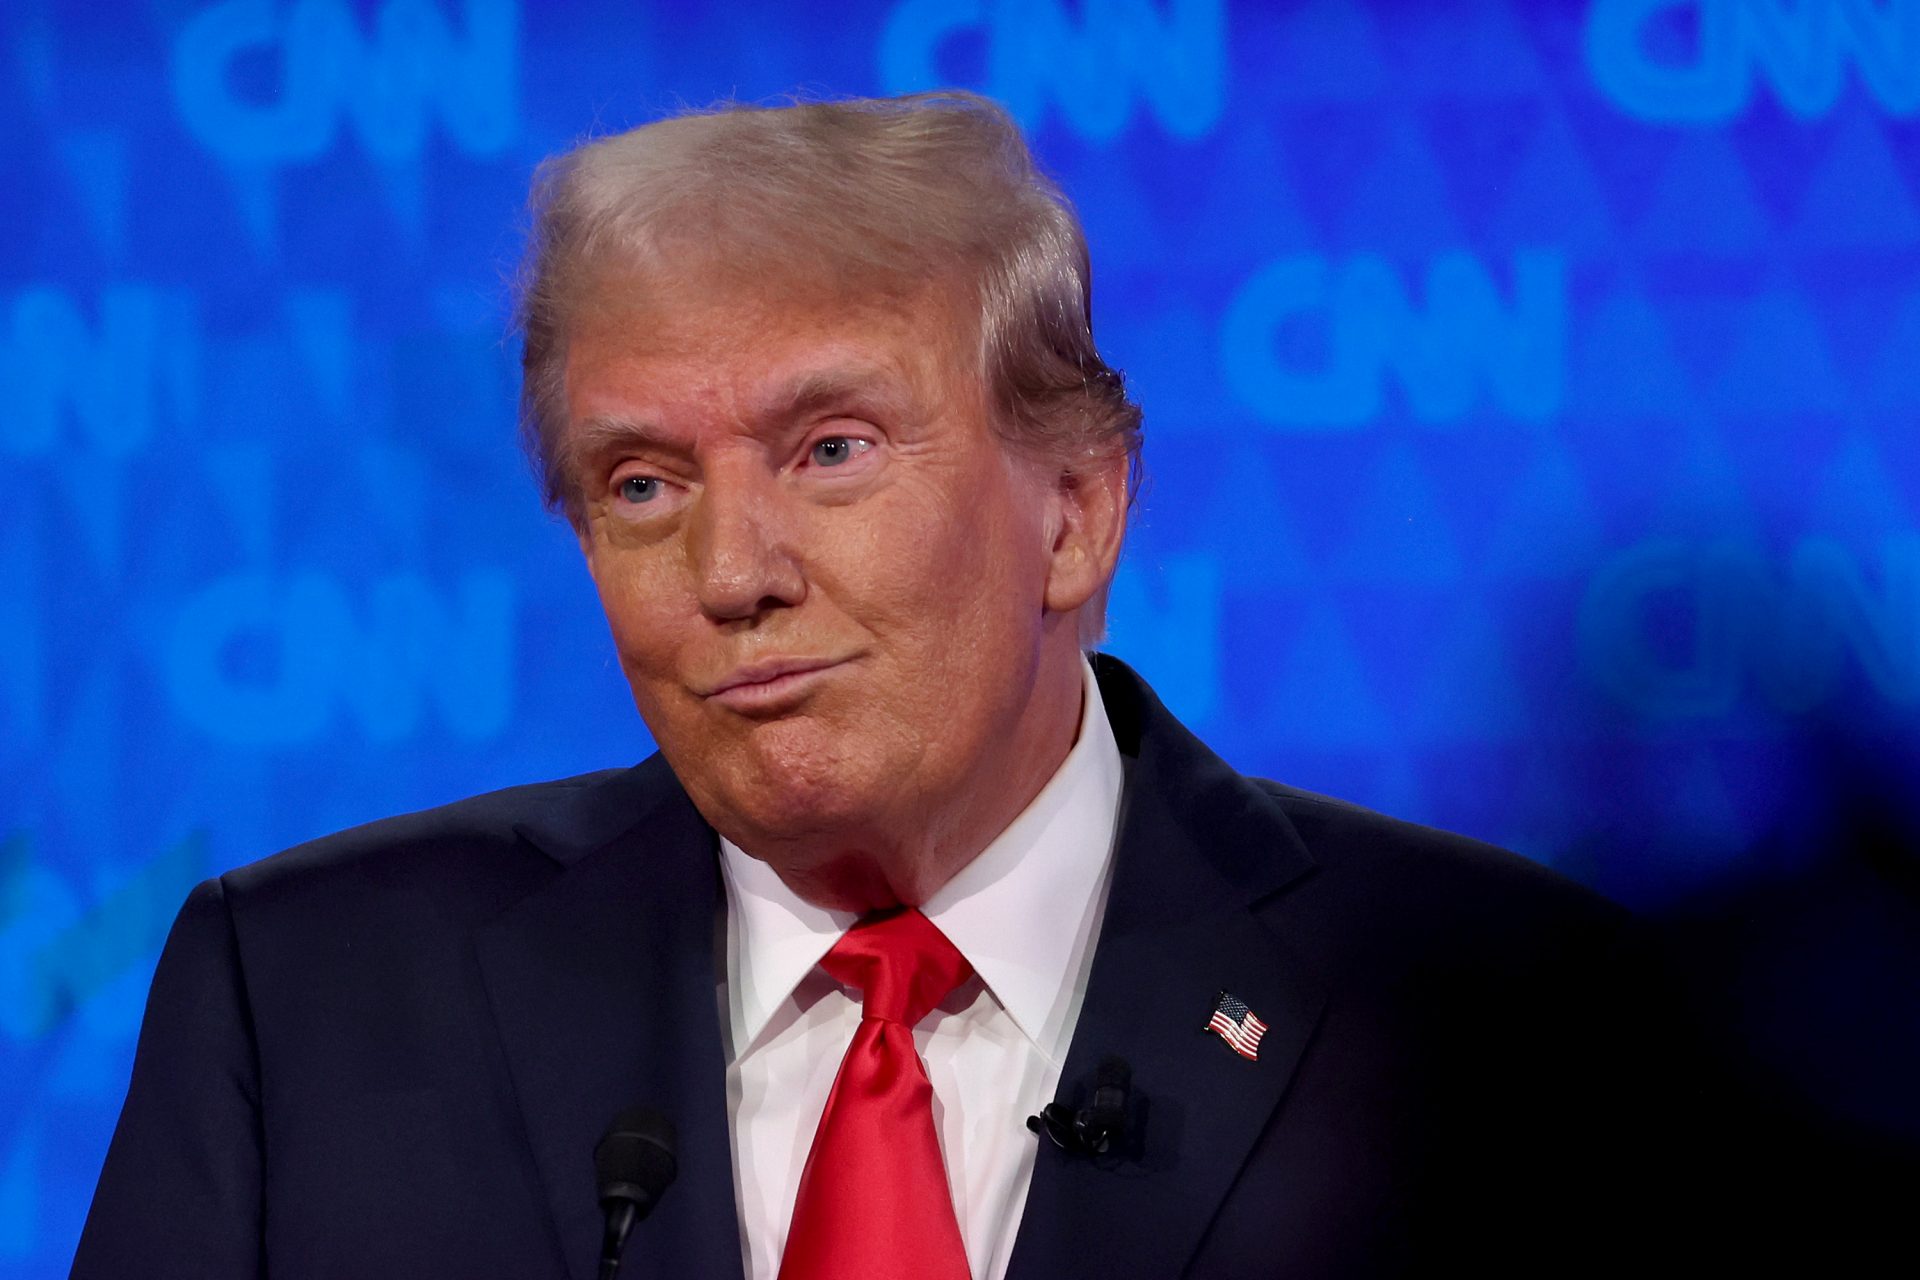 Trump only brought in $8 million on debate night 